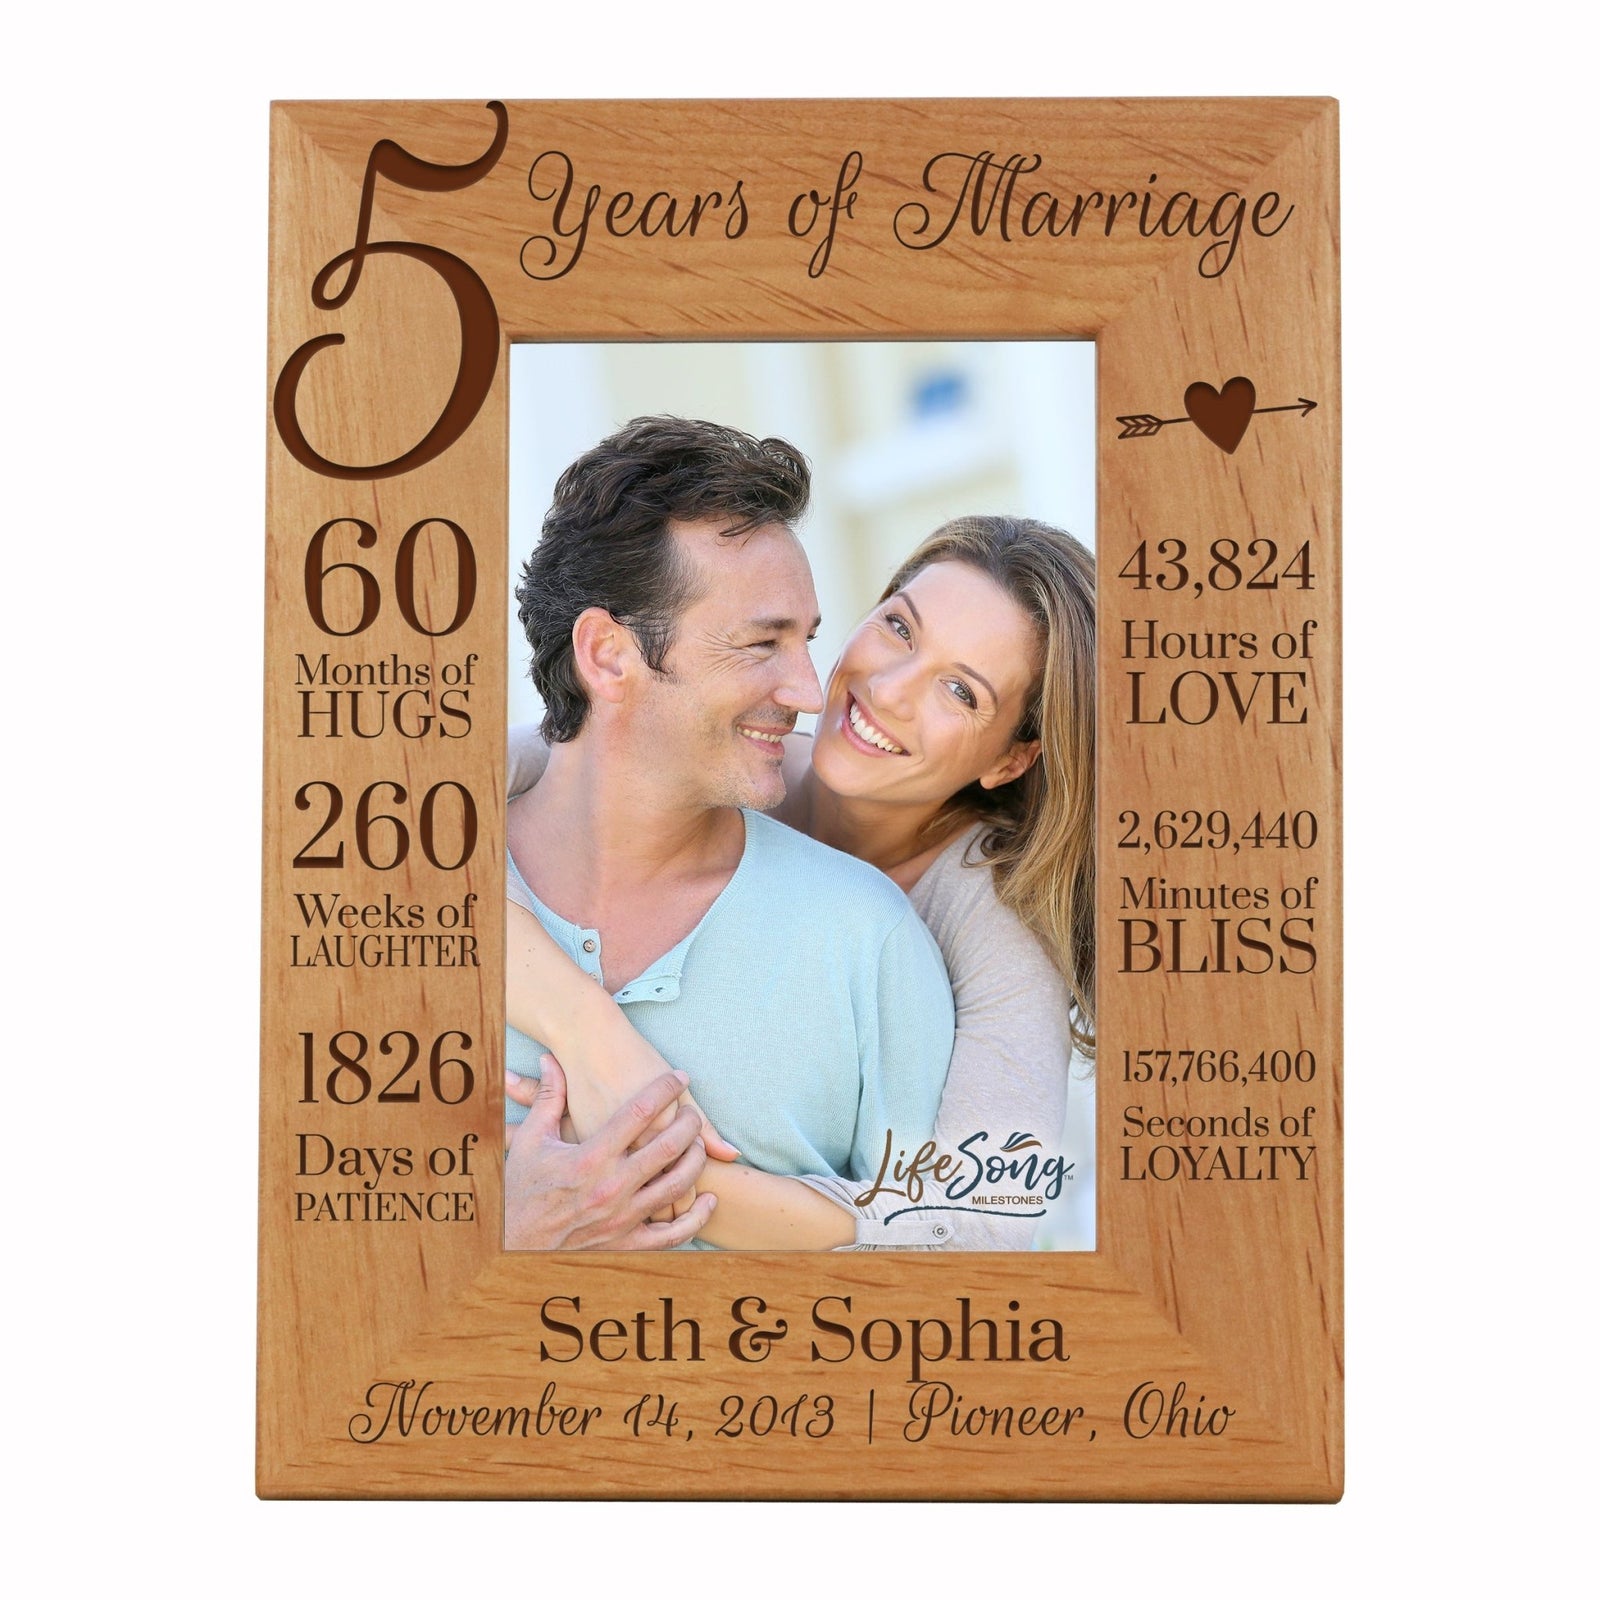 Lifesong Milestones Personalized Engraved 5th Wedding Anniversary Photo Frame Wall Decor Gift for Couples